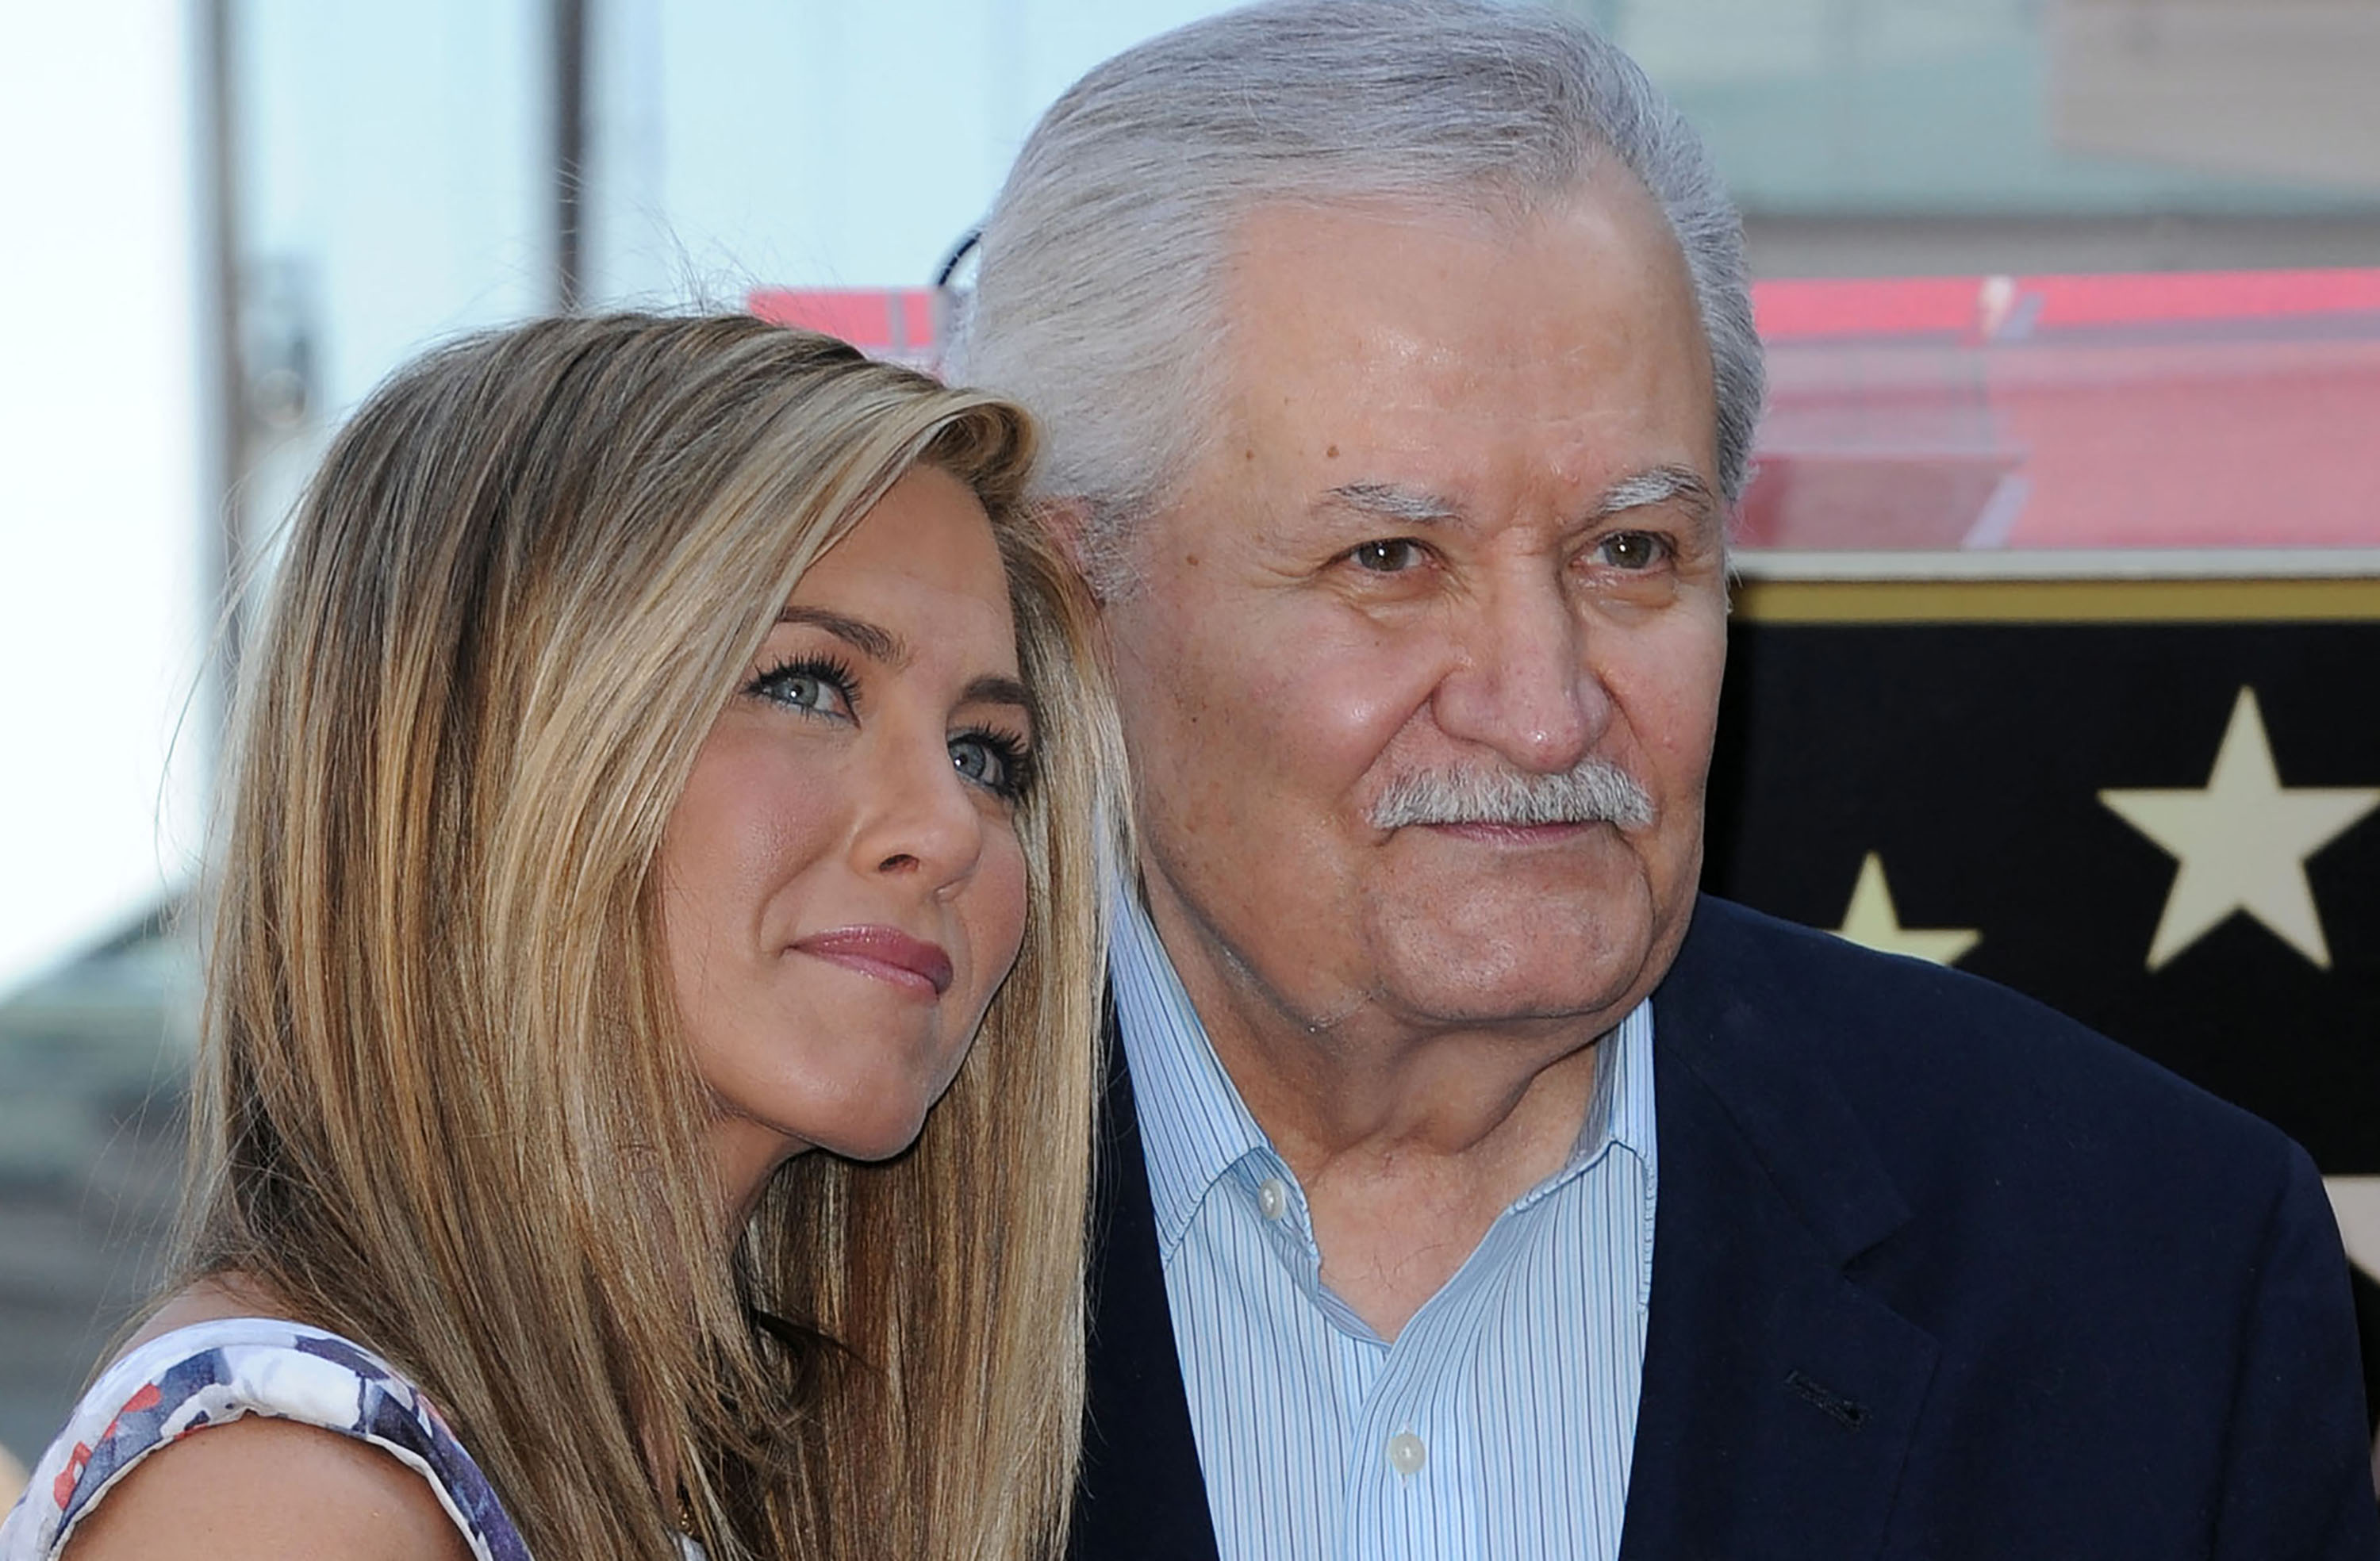 Jennifer and John Aniston at Jennifer Aniston's Hollywood Walk of Fame star ceremony in Hollywood, California on February 22, 2012 | Source: Getty Images